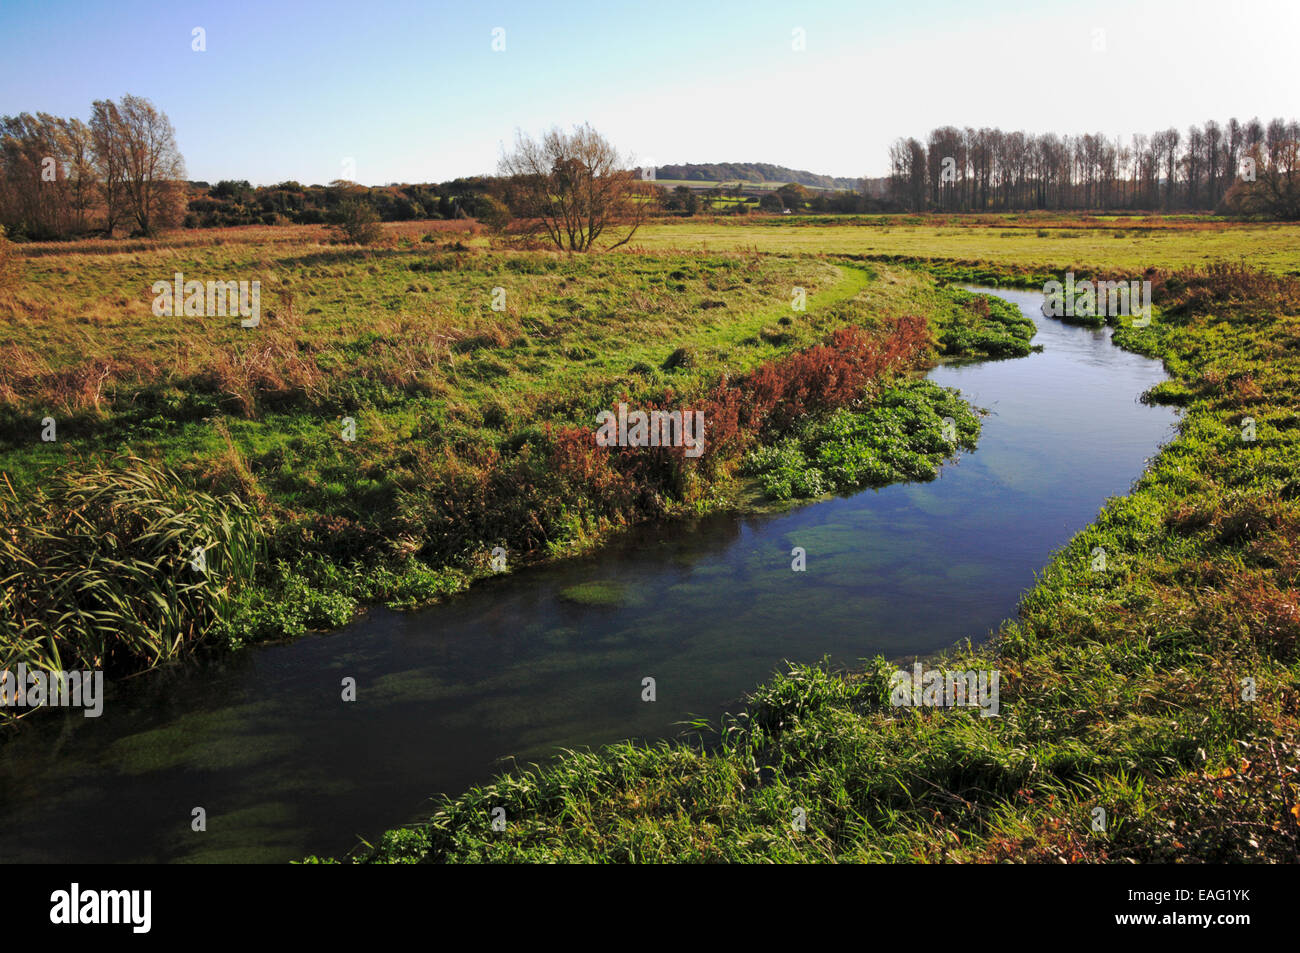 A view of the River Glaven and Glaven Valley at Wiveton, Norfolk, England, United Kingdom. Stock Photo